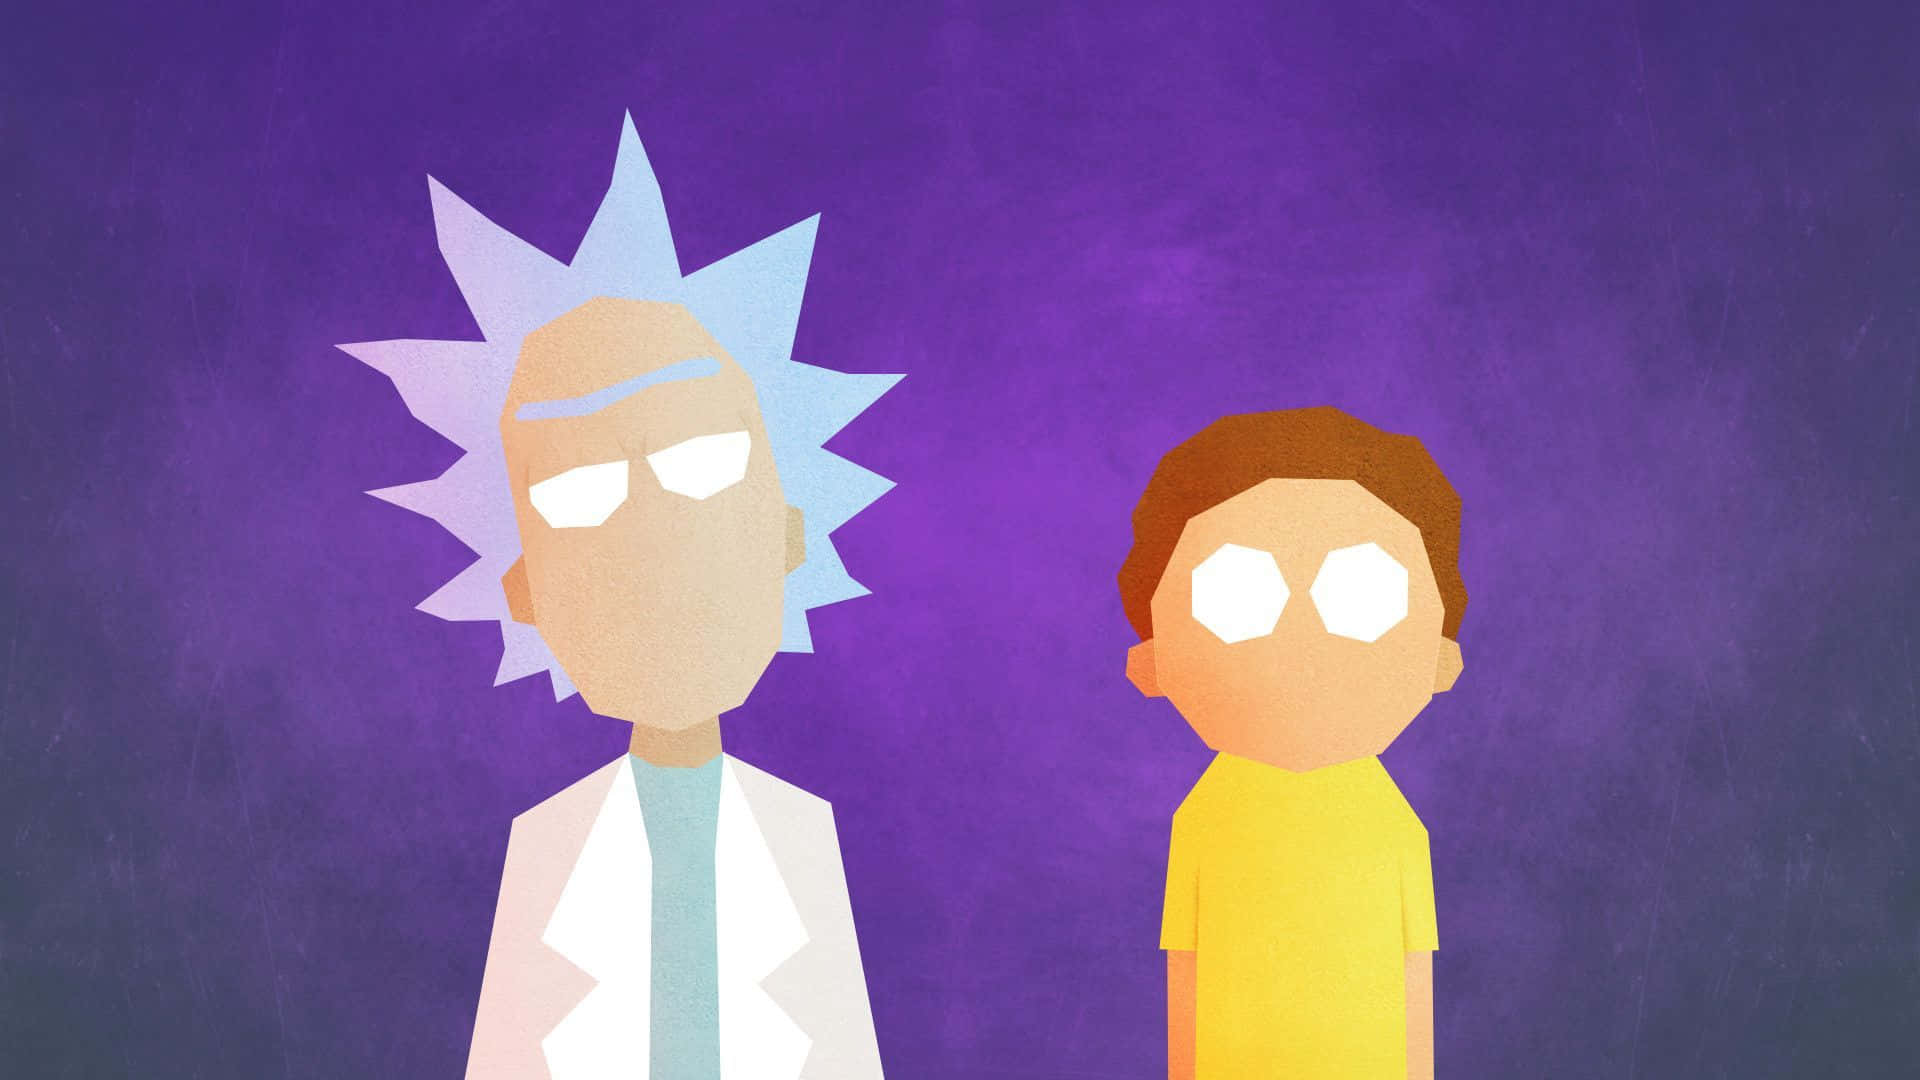 Get ready to explore the universe with Rick and Morty on your laptop Wallpaper